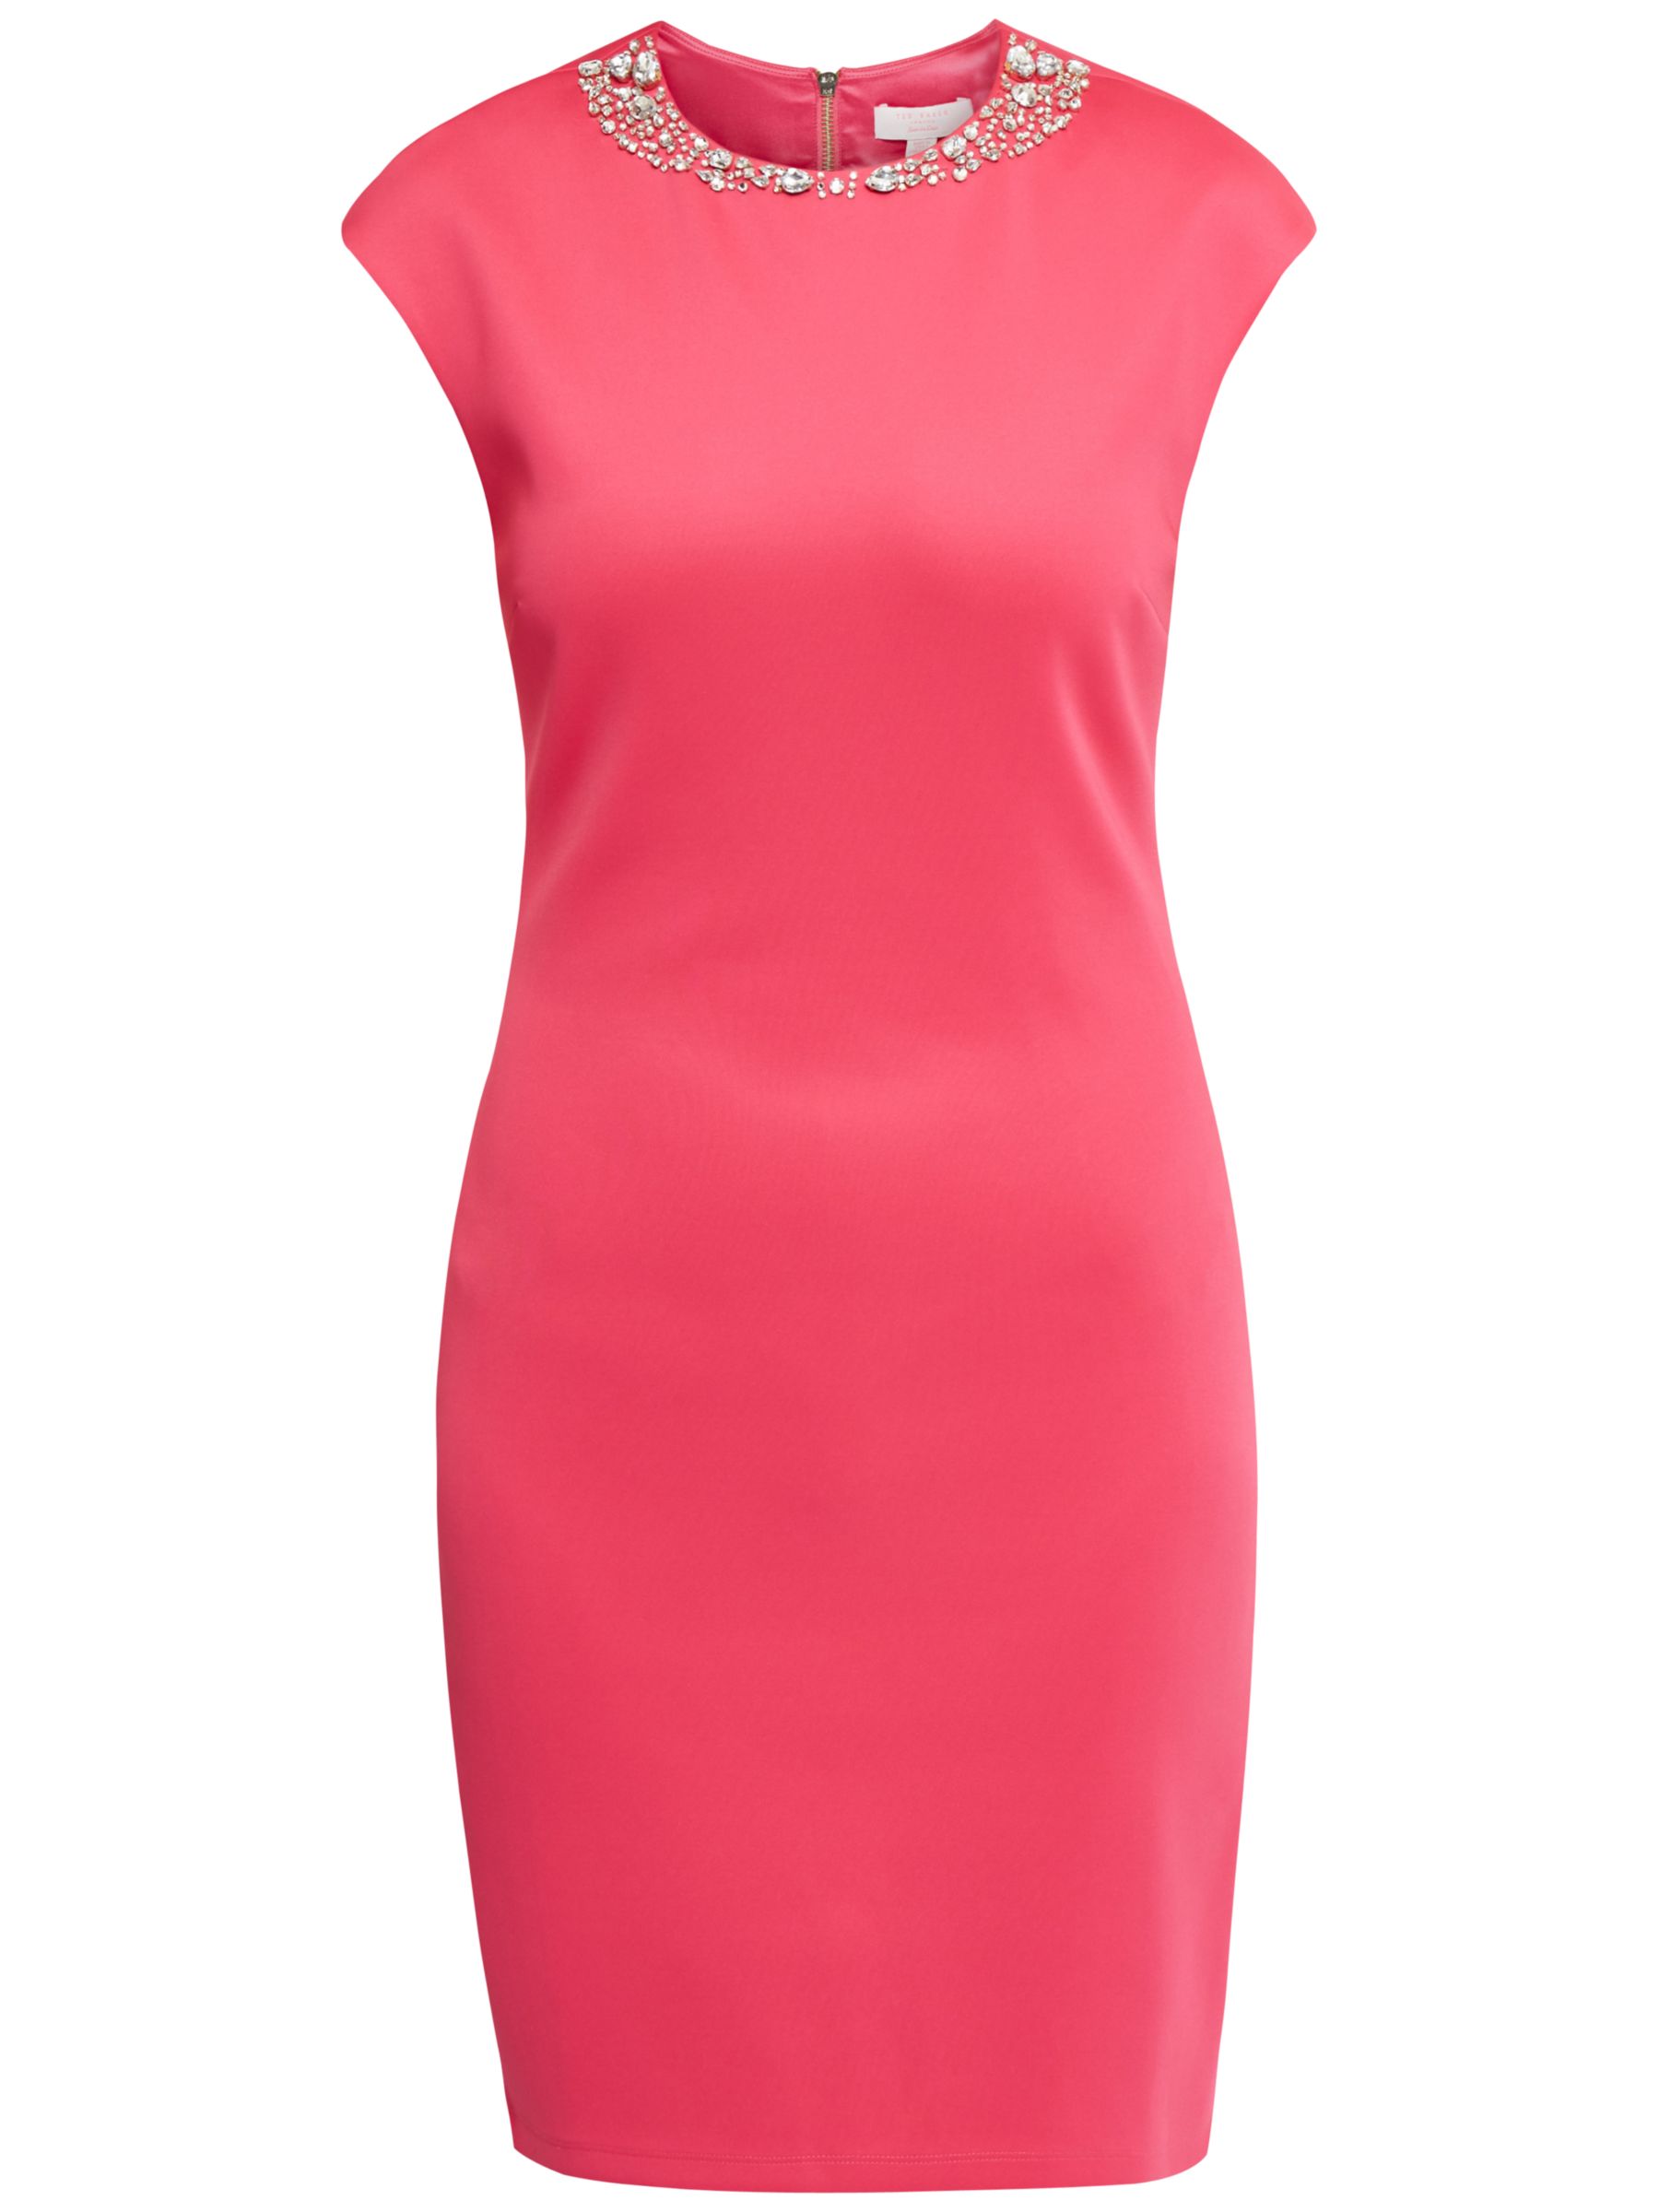 ted baker pink and black dress